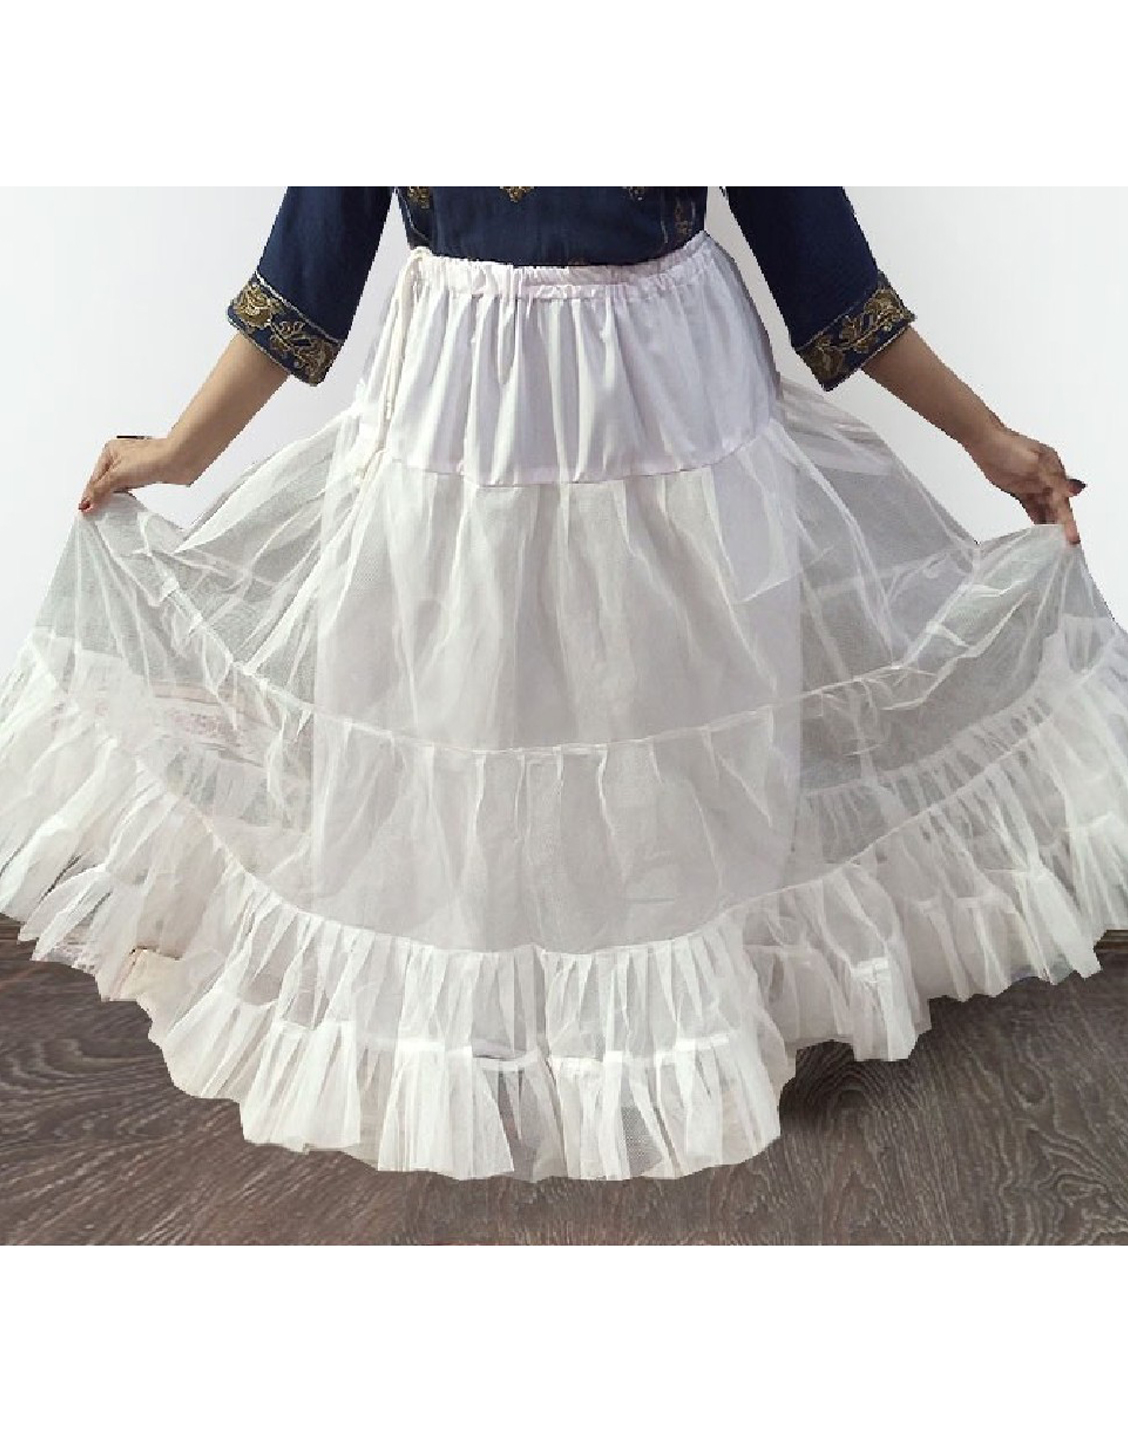 https://www.pakstyle.pk/img/products/l/p15145-can-can-net-skirt-update.jpg